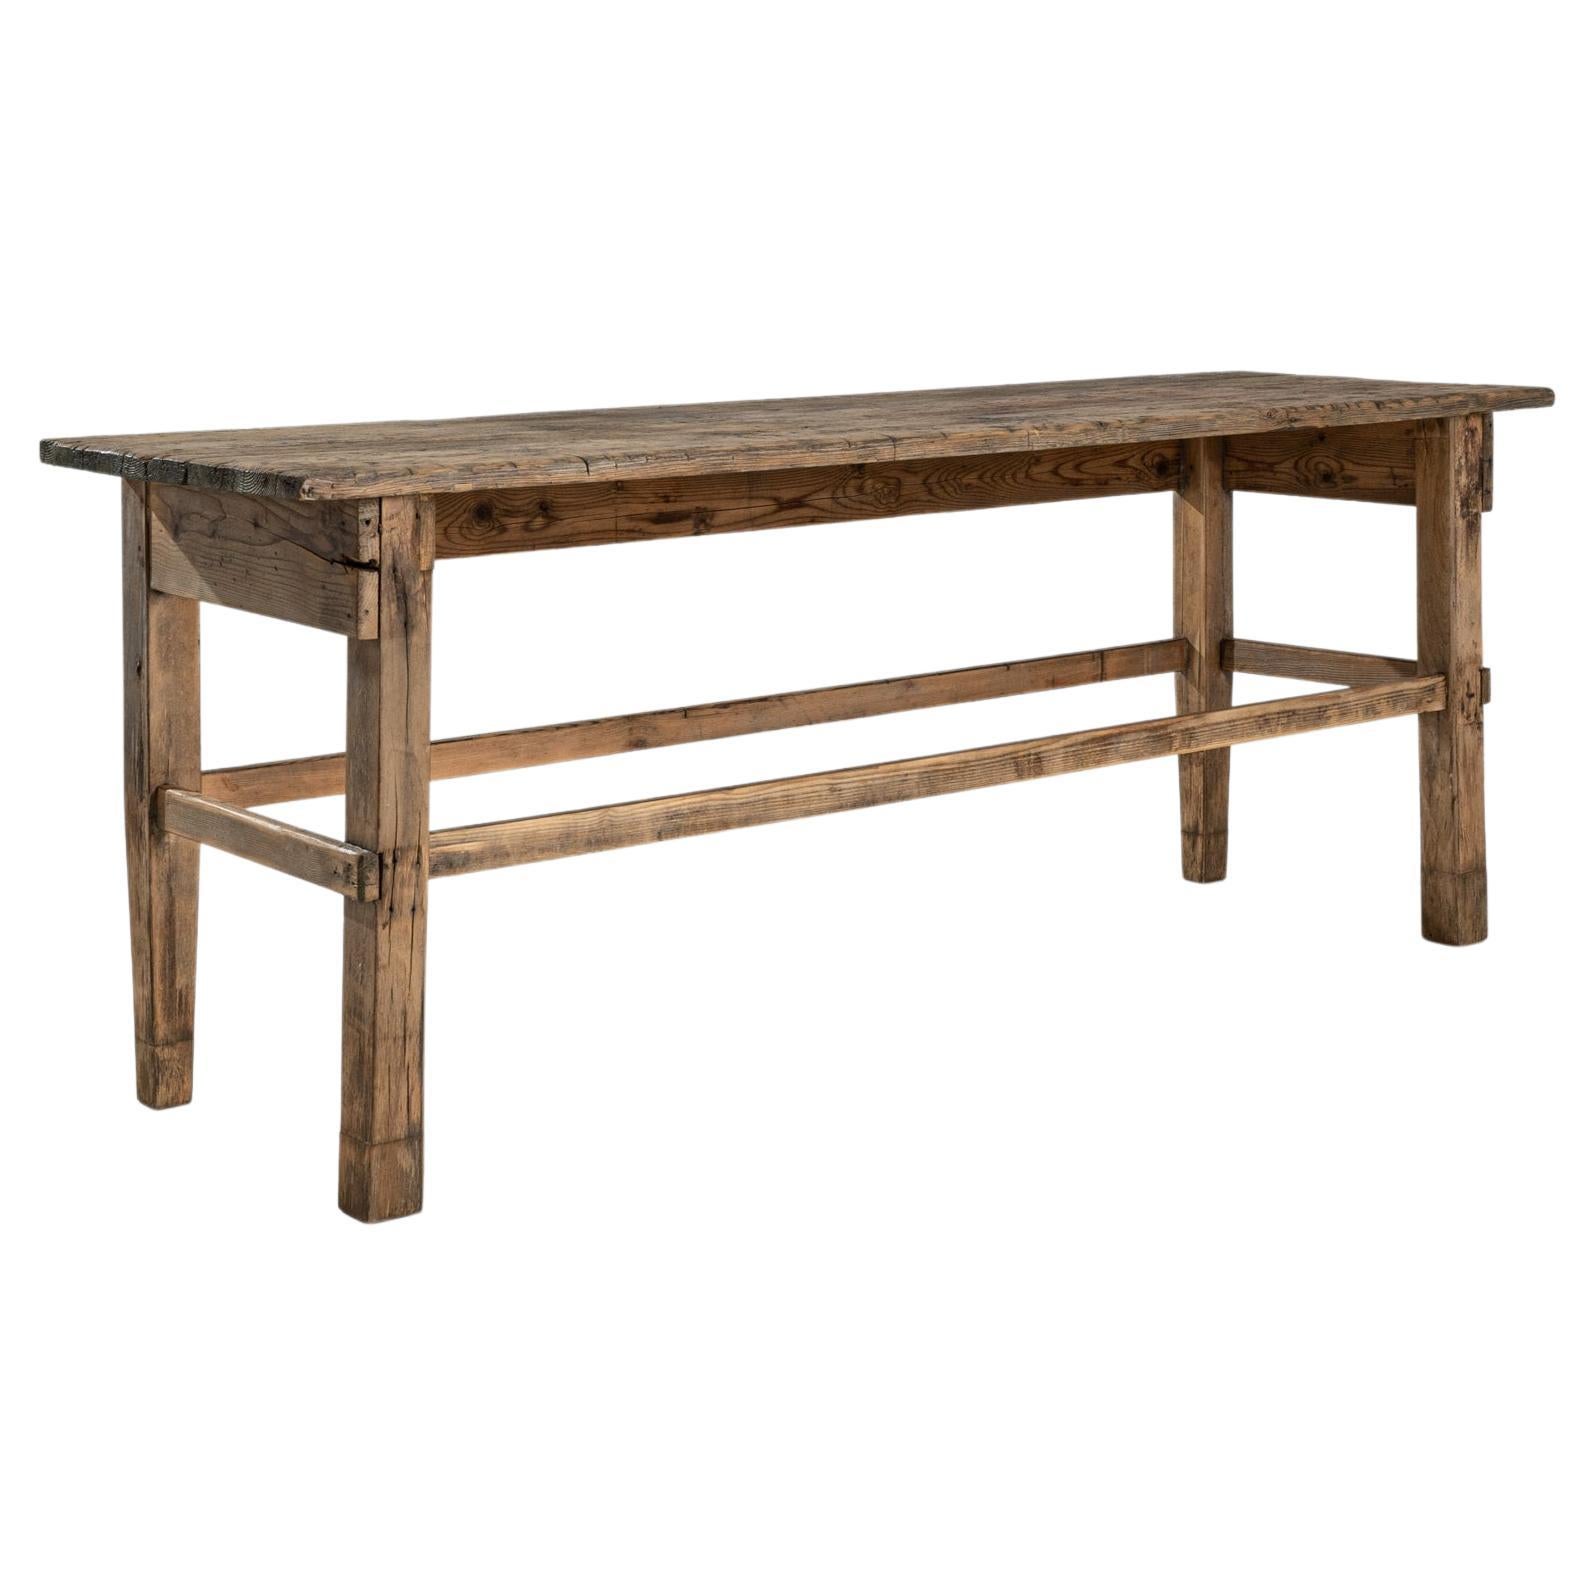 Early 20th Century, Rustic Central European Wooden Table